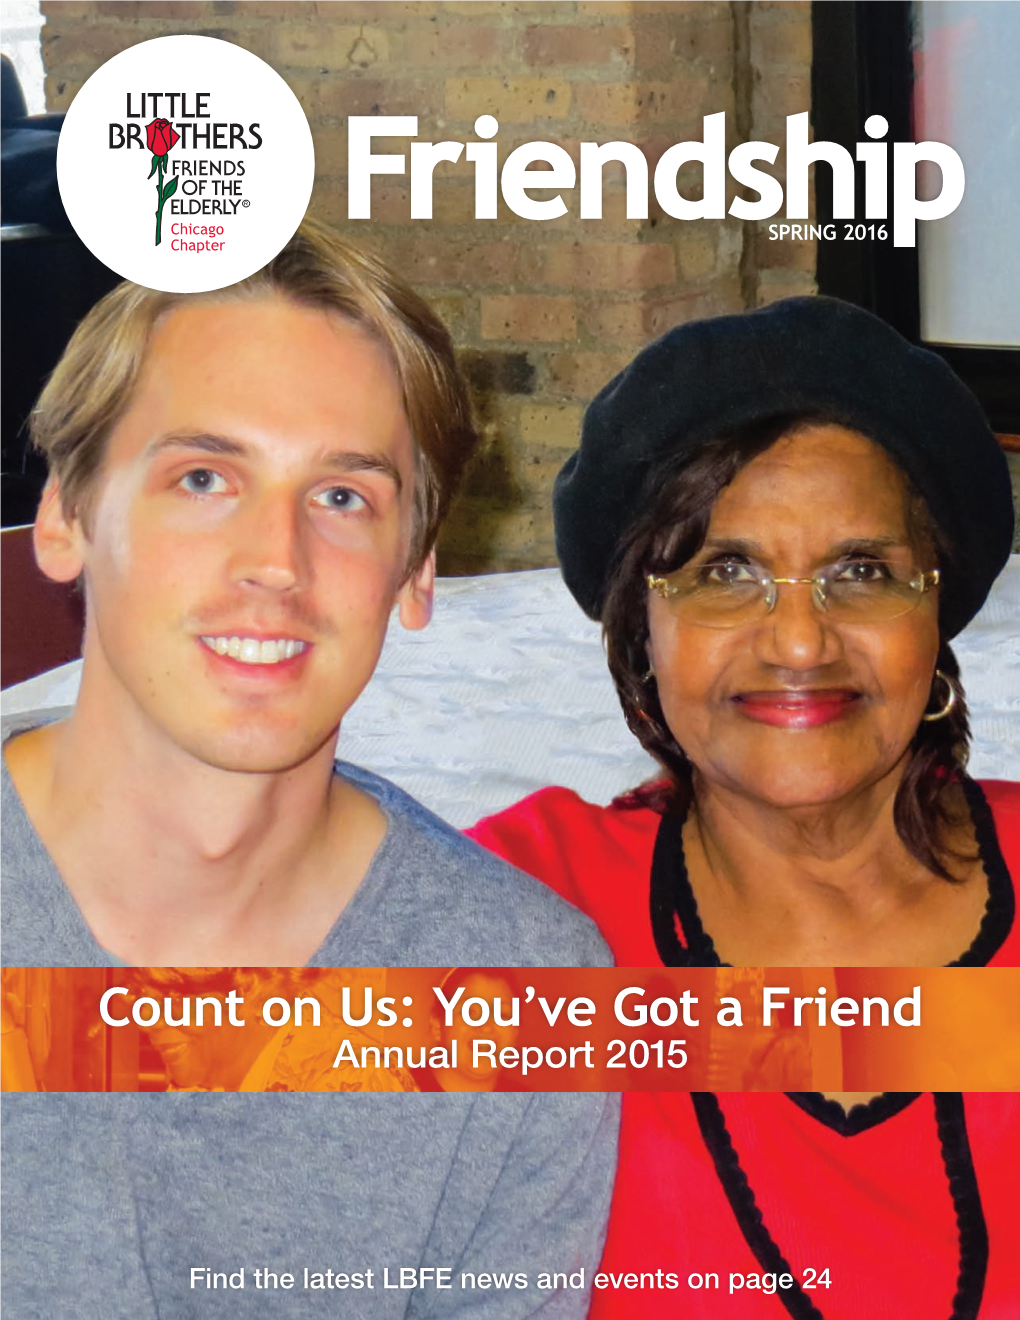 Friendship, FY2015 Annual Report